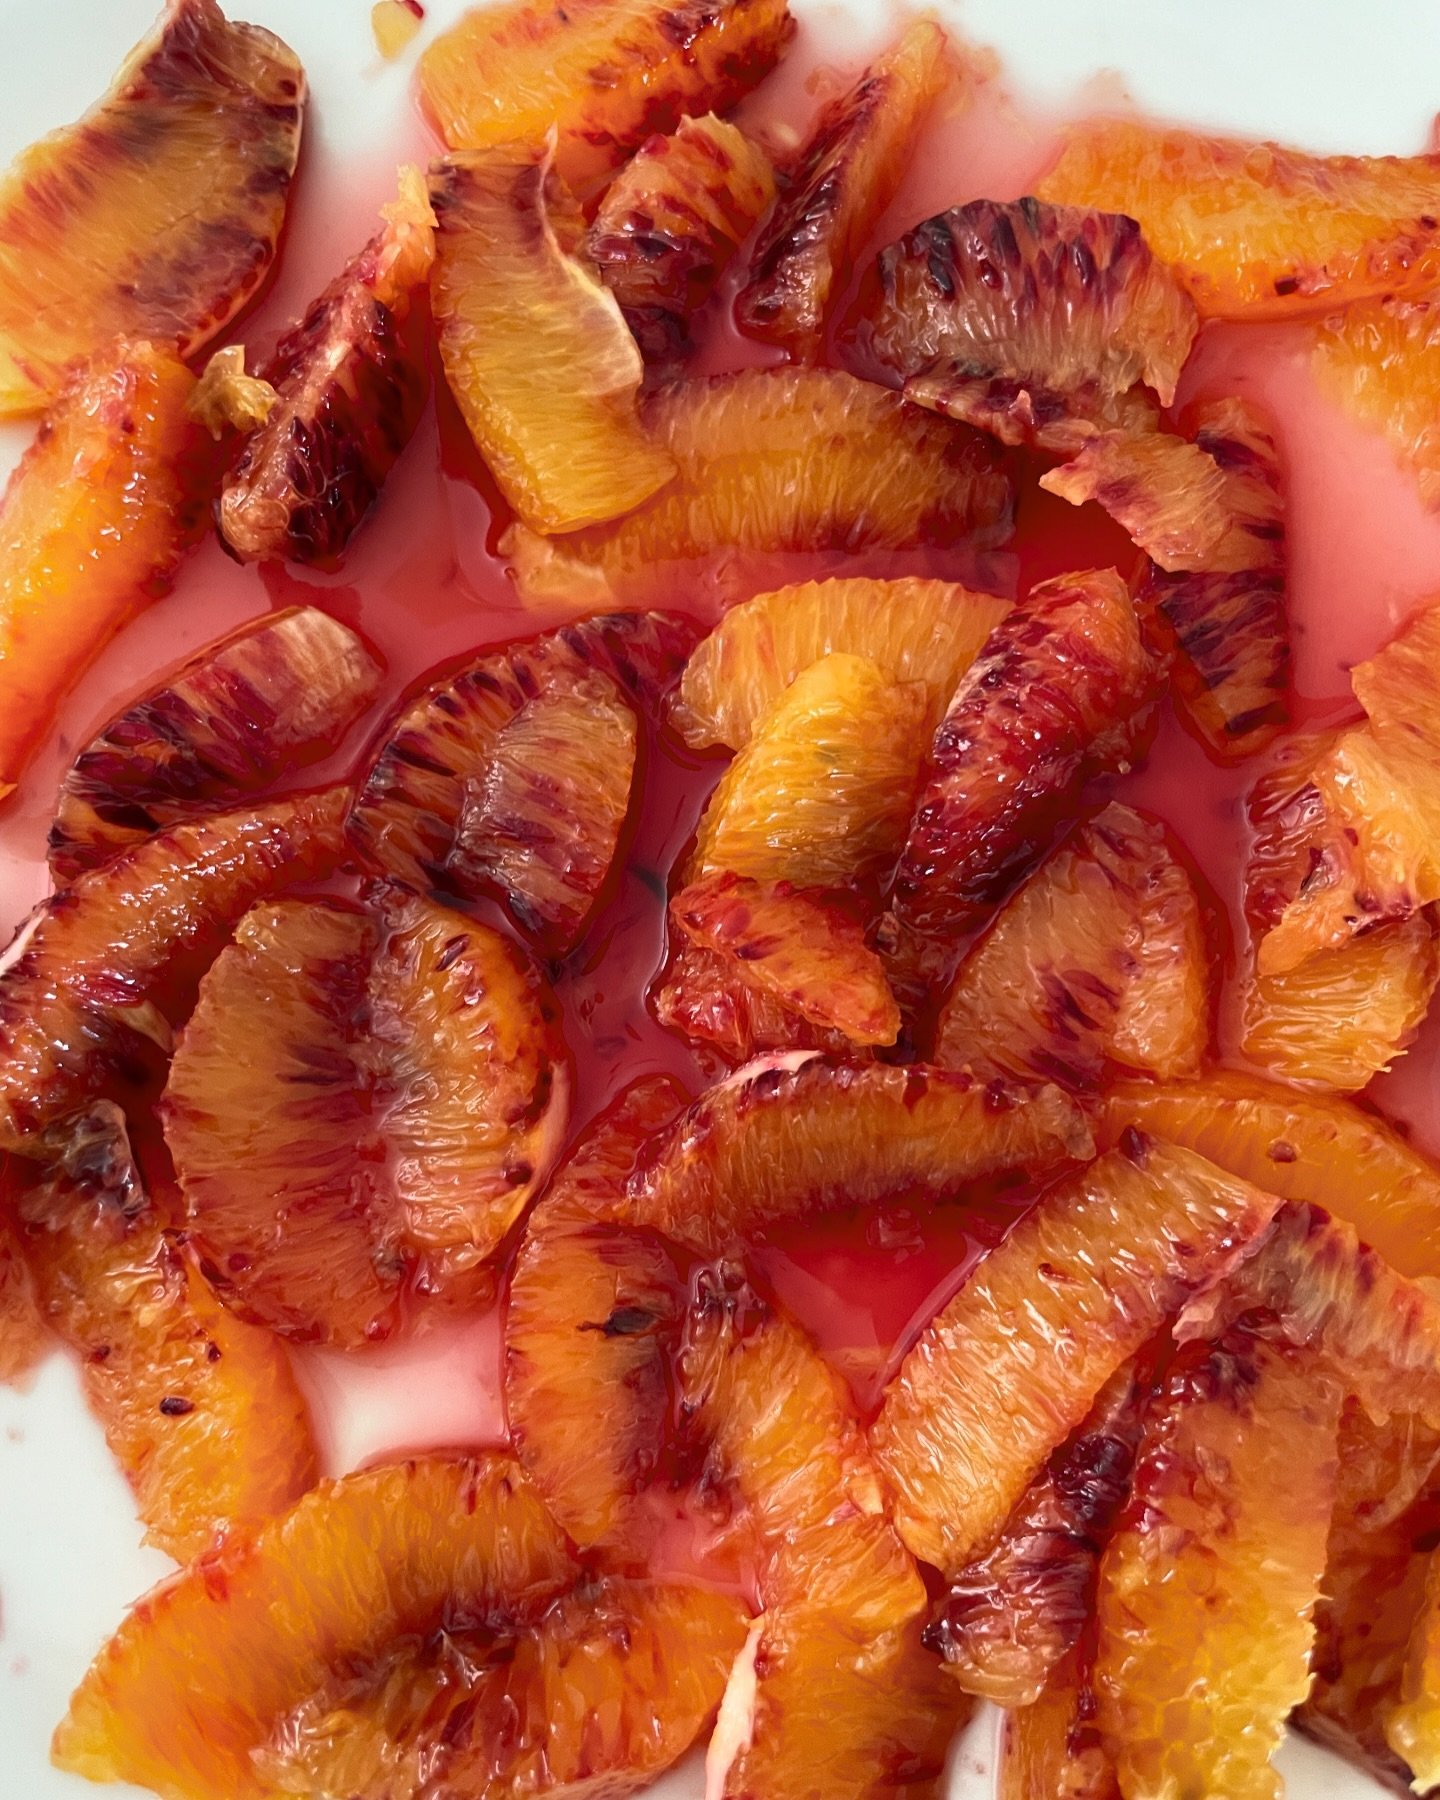 Experimenting with freezing a big batch of blood orange segments to use in summertime dishes. Ceviches, salads, desserts&hellip;.just waiting on that sunshine!☀️